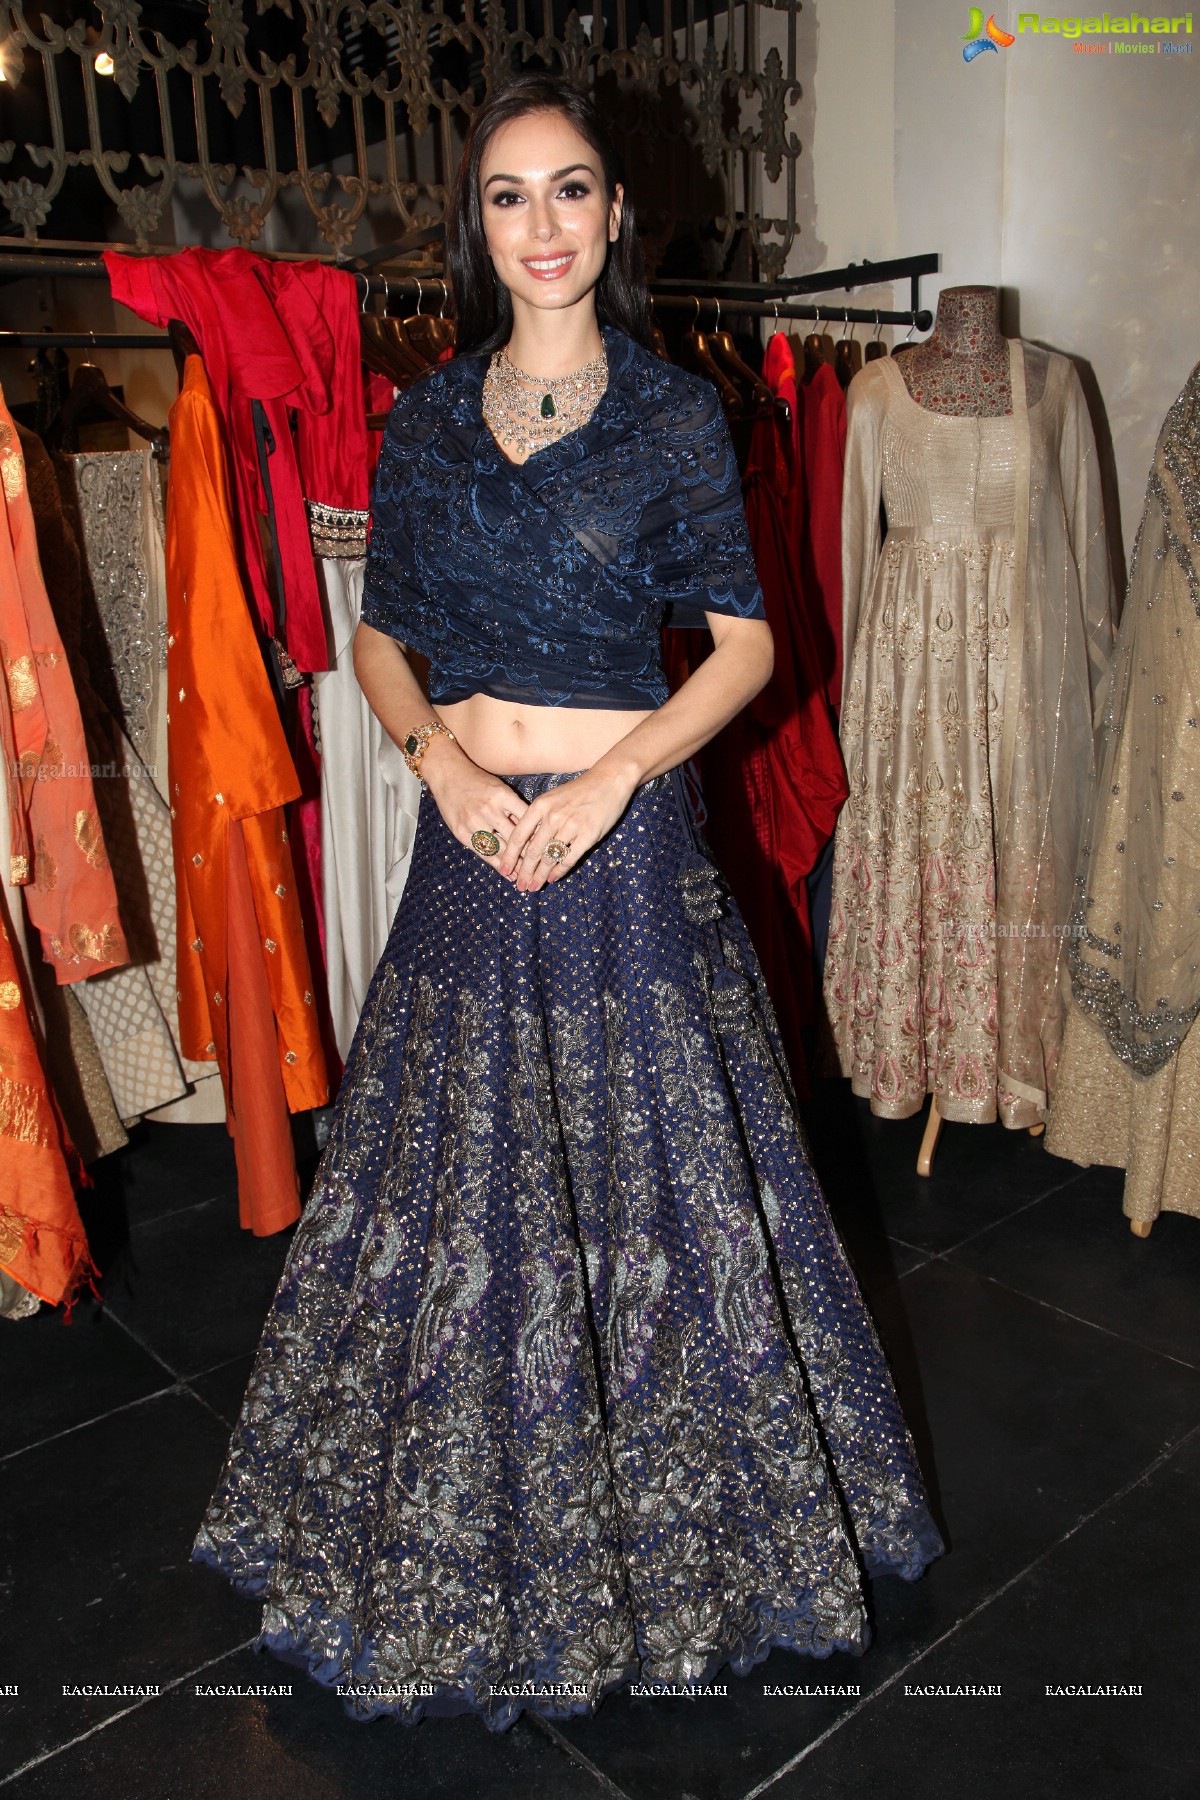 Pinky Reddy unveils Jade Brand by Mounica and Karishma at Beside Kalakriti Art Gallery, Hyderabad